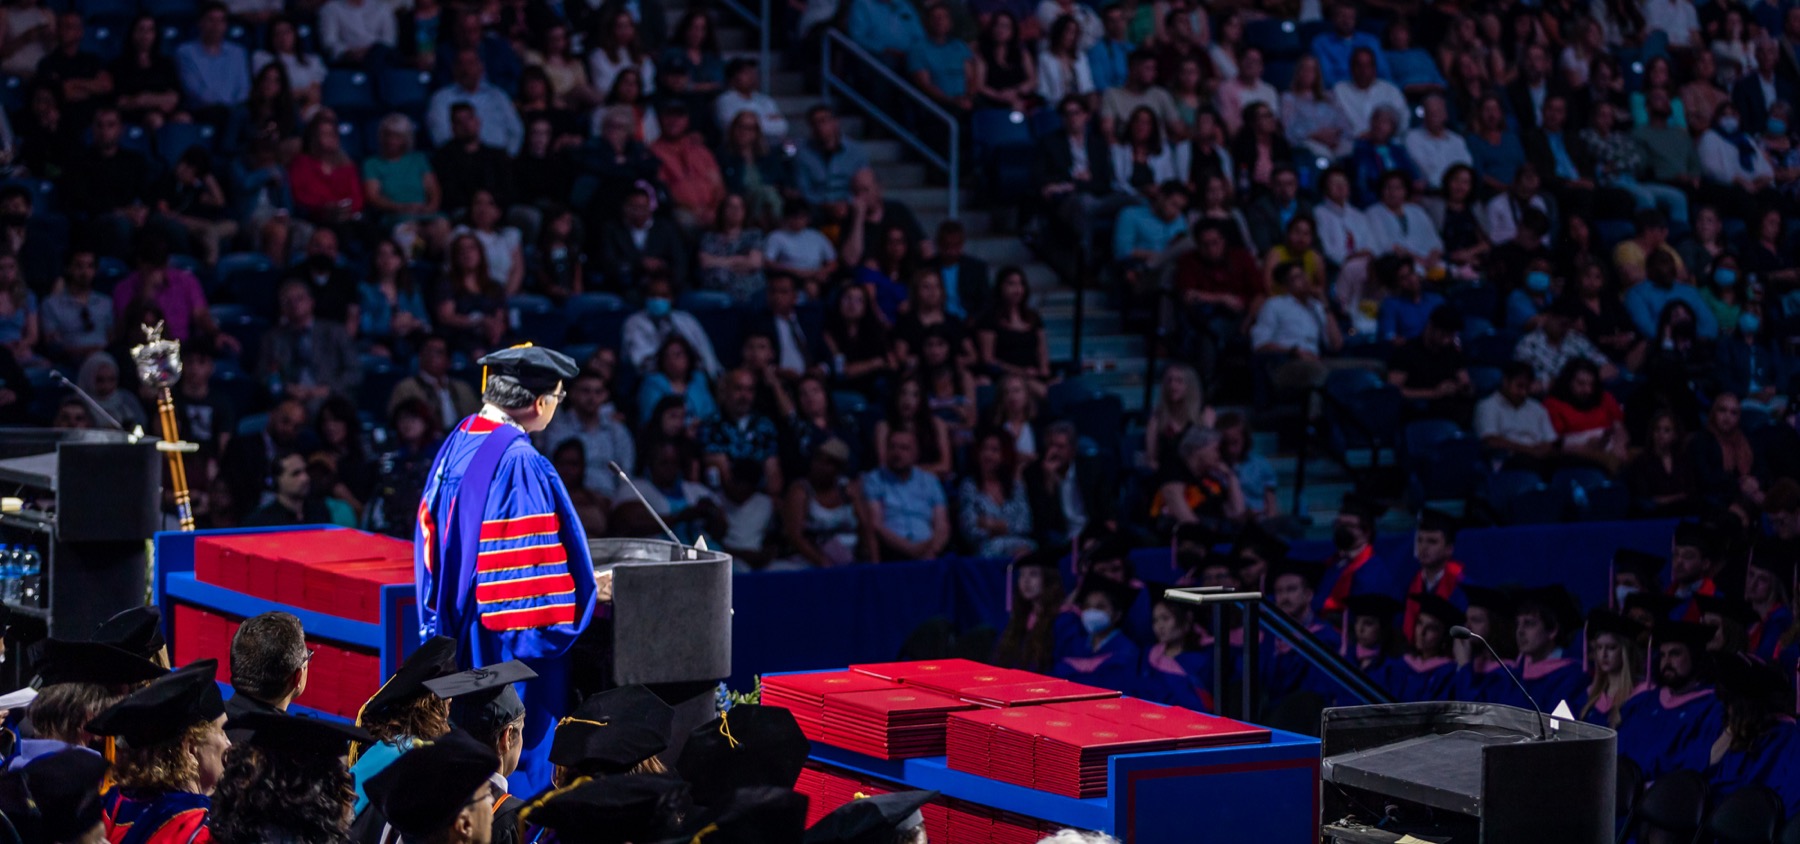 Dr. A. Gabriel Esteban presented remarks to the graduates at his final commencement weekend as DePaul president.